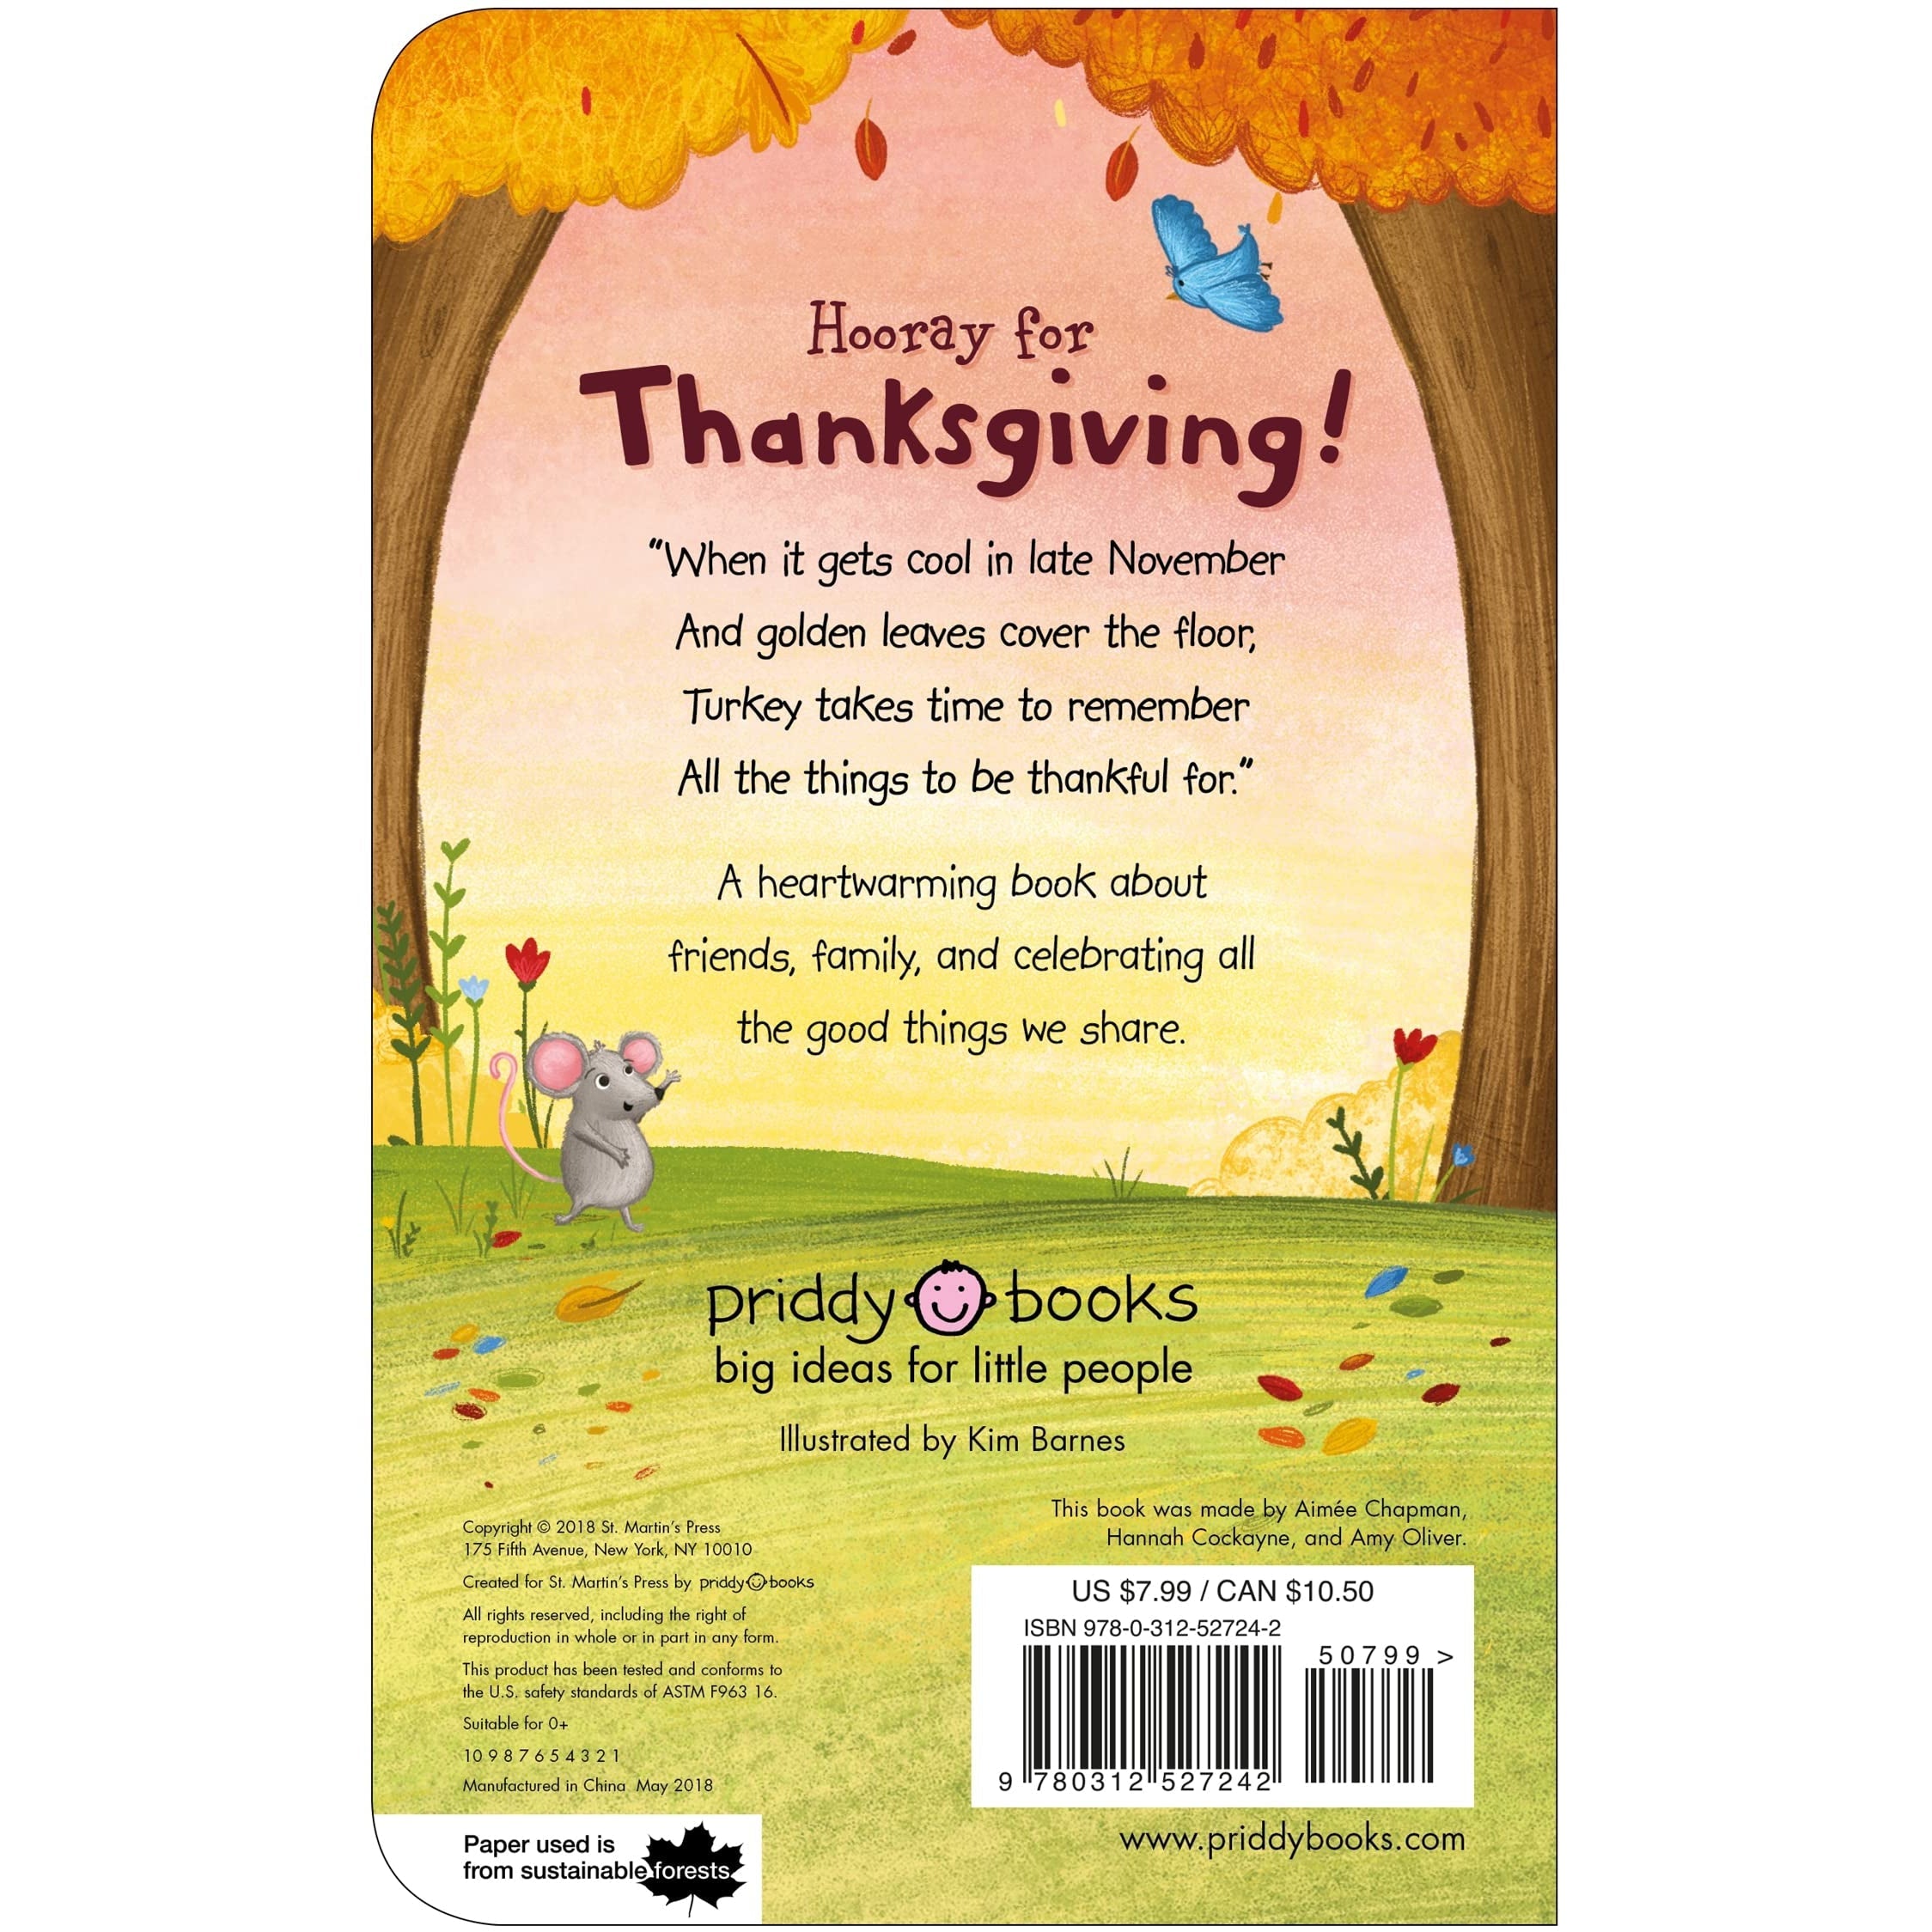 Priddy Books: Shiny Shapes: Hooray for Thanksgiving! (Board Book)-MACMILLAN PUBLISHERS-Little Giant Kidz